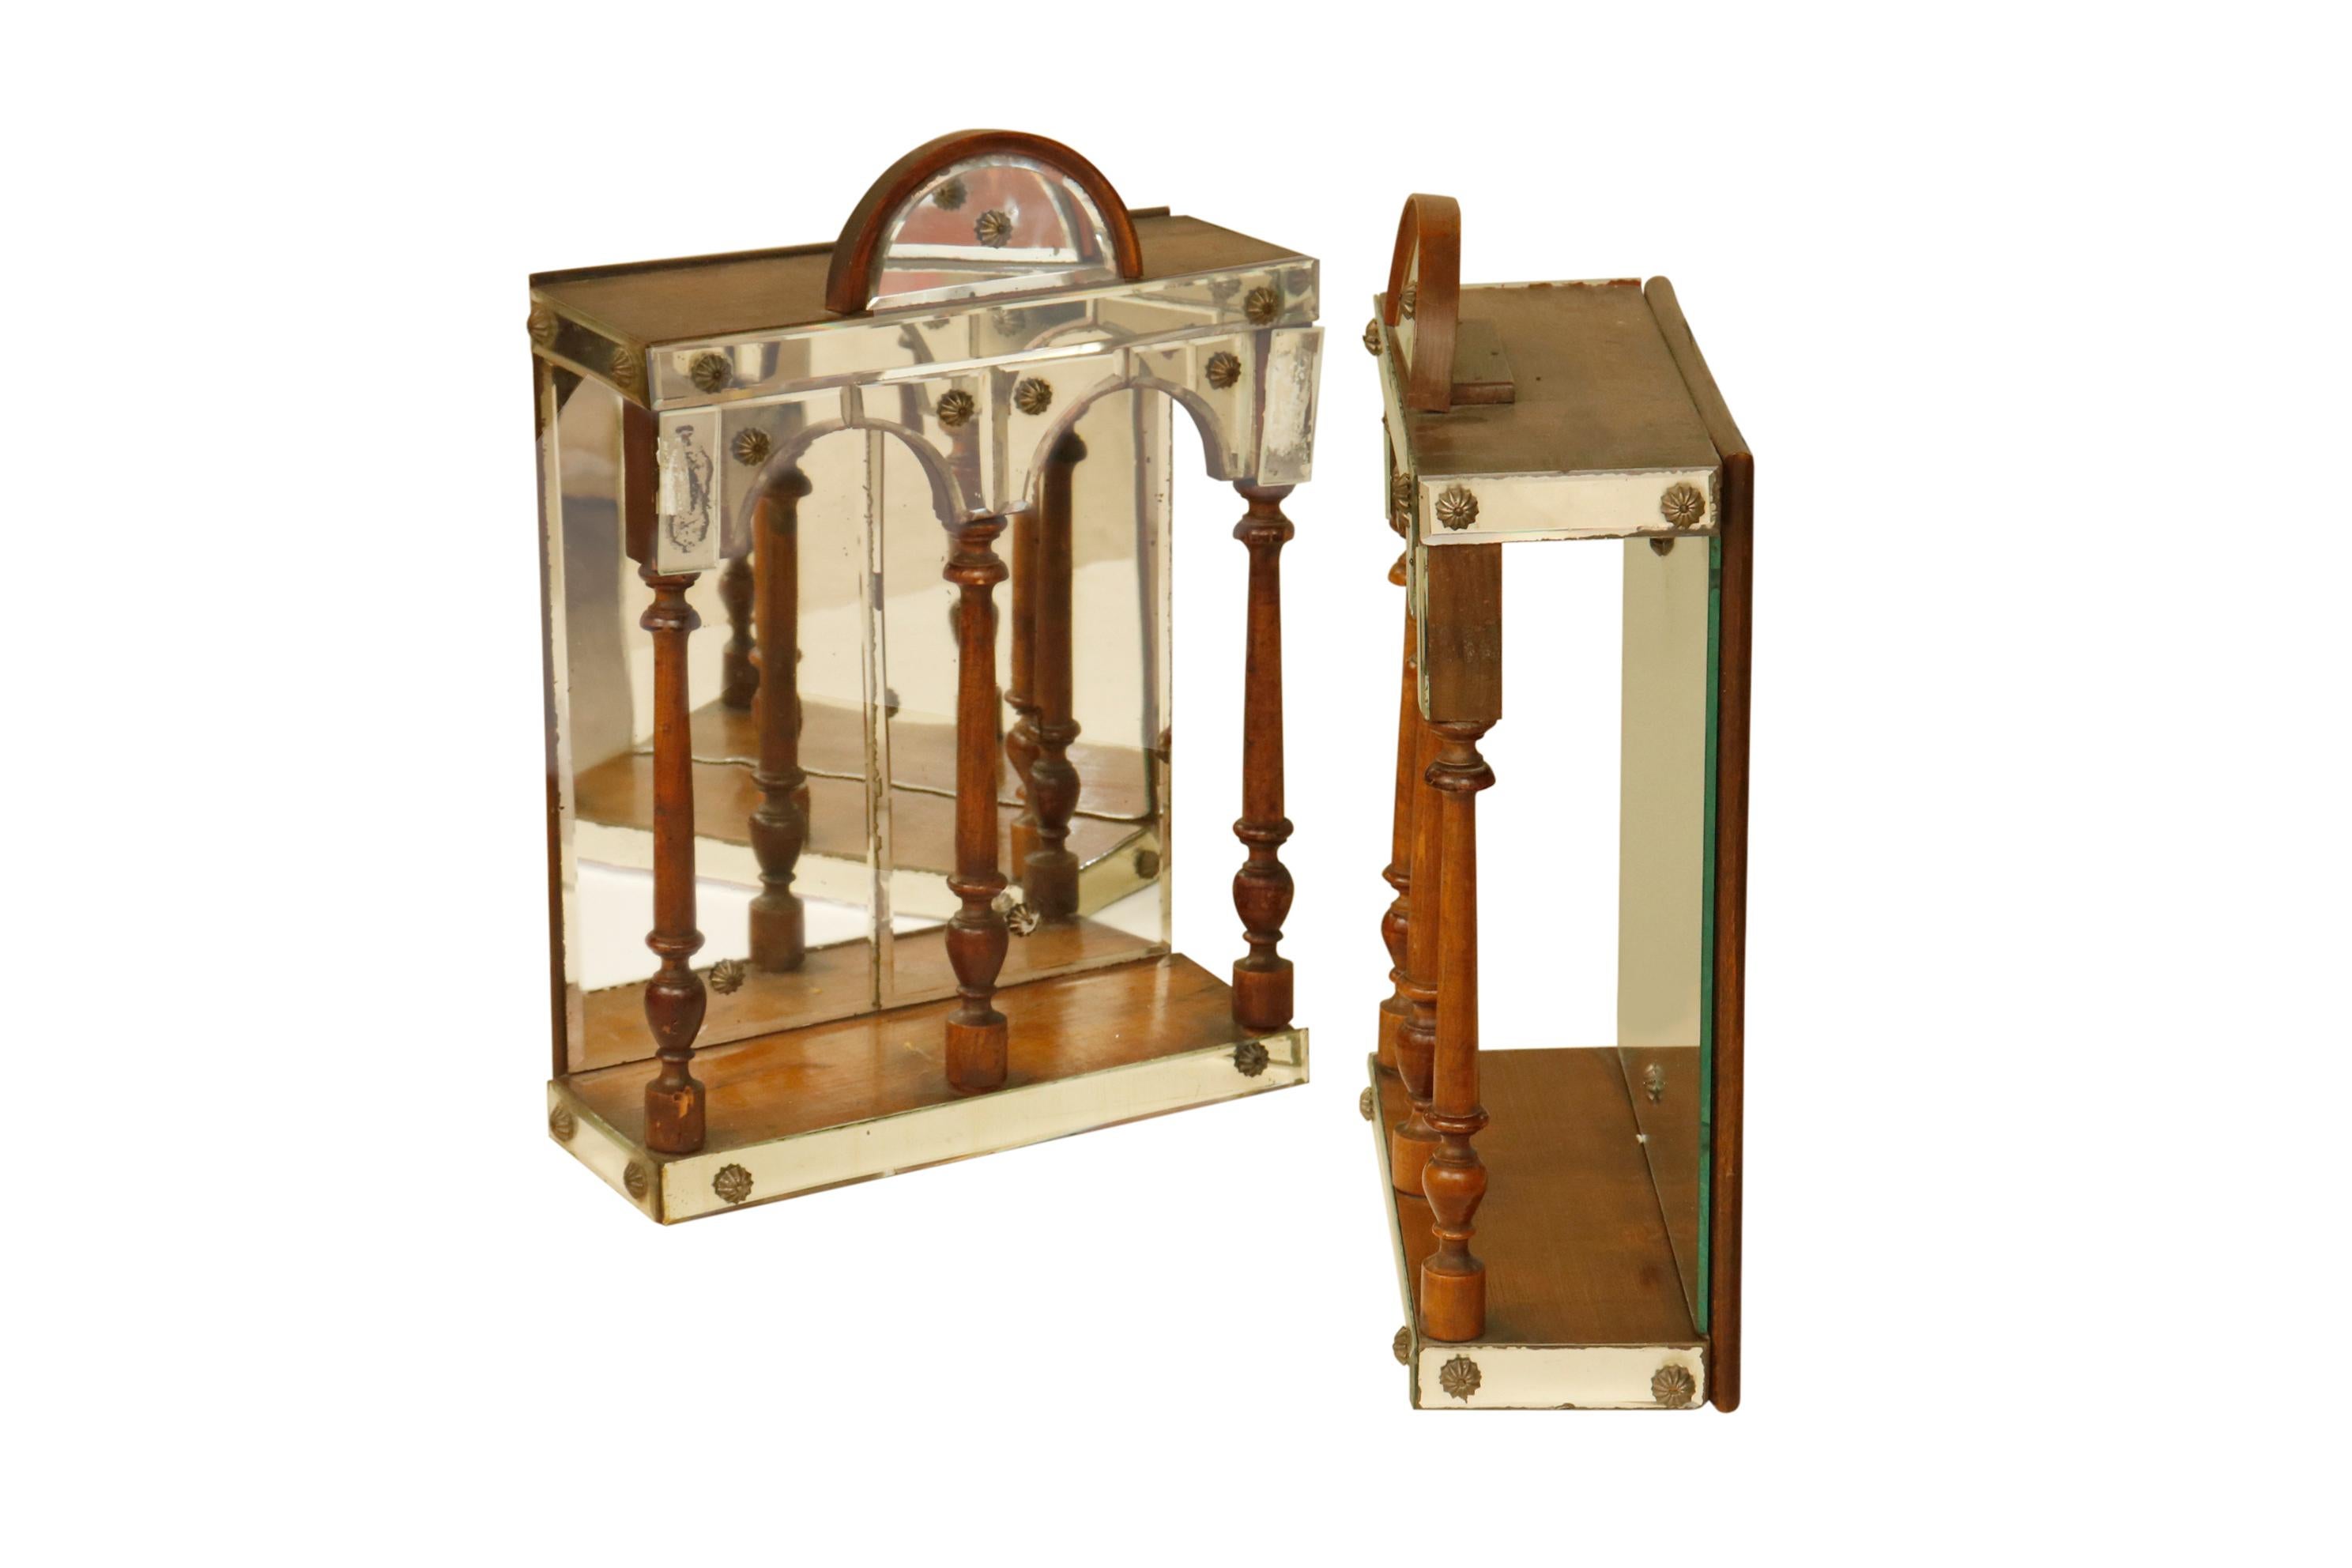 A pair of diminutive hanging wall curio cabinets. Mirrored and embellished in a renaissance Revival style.